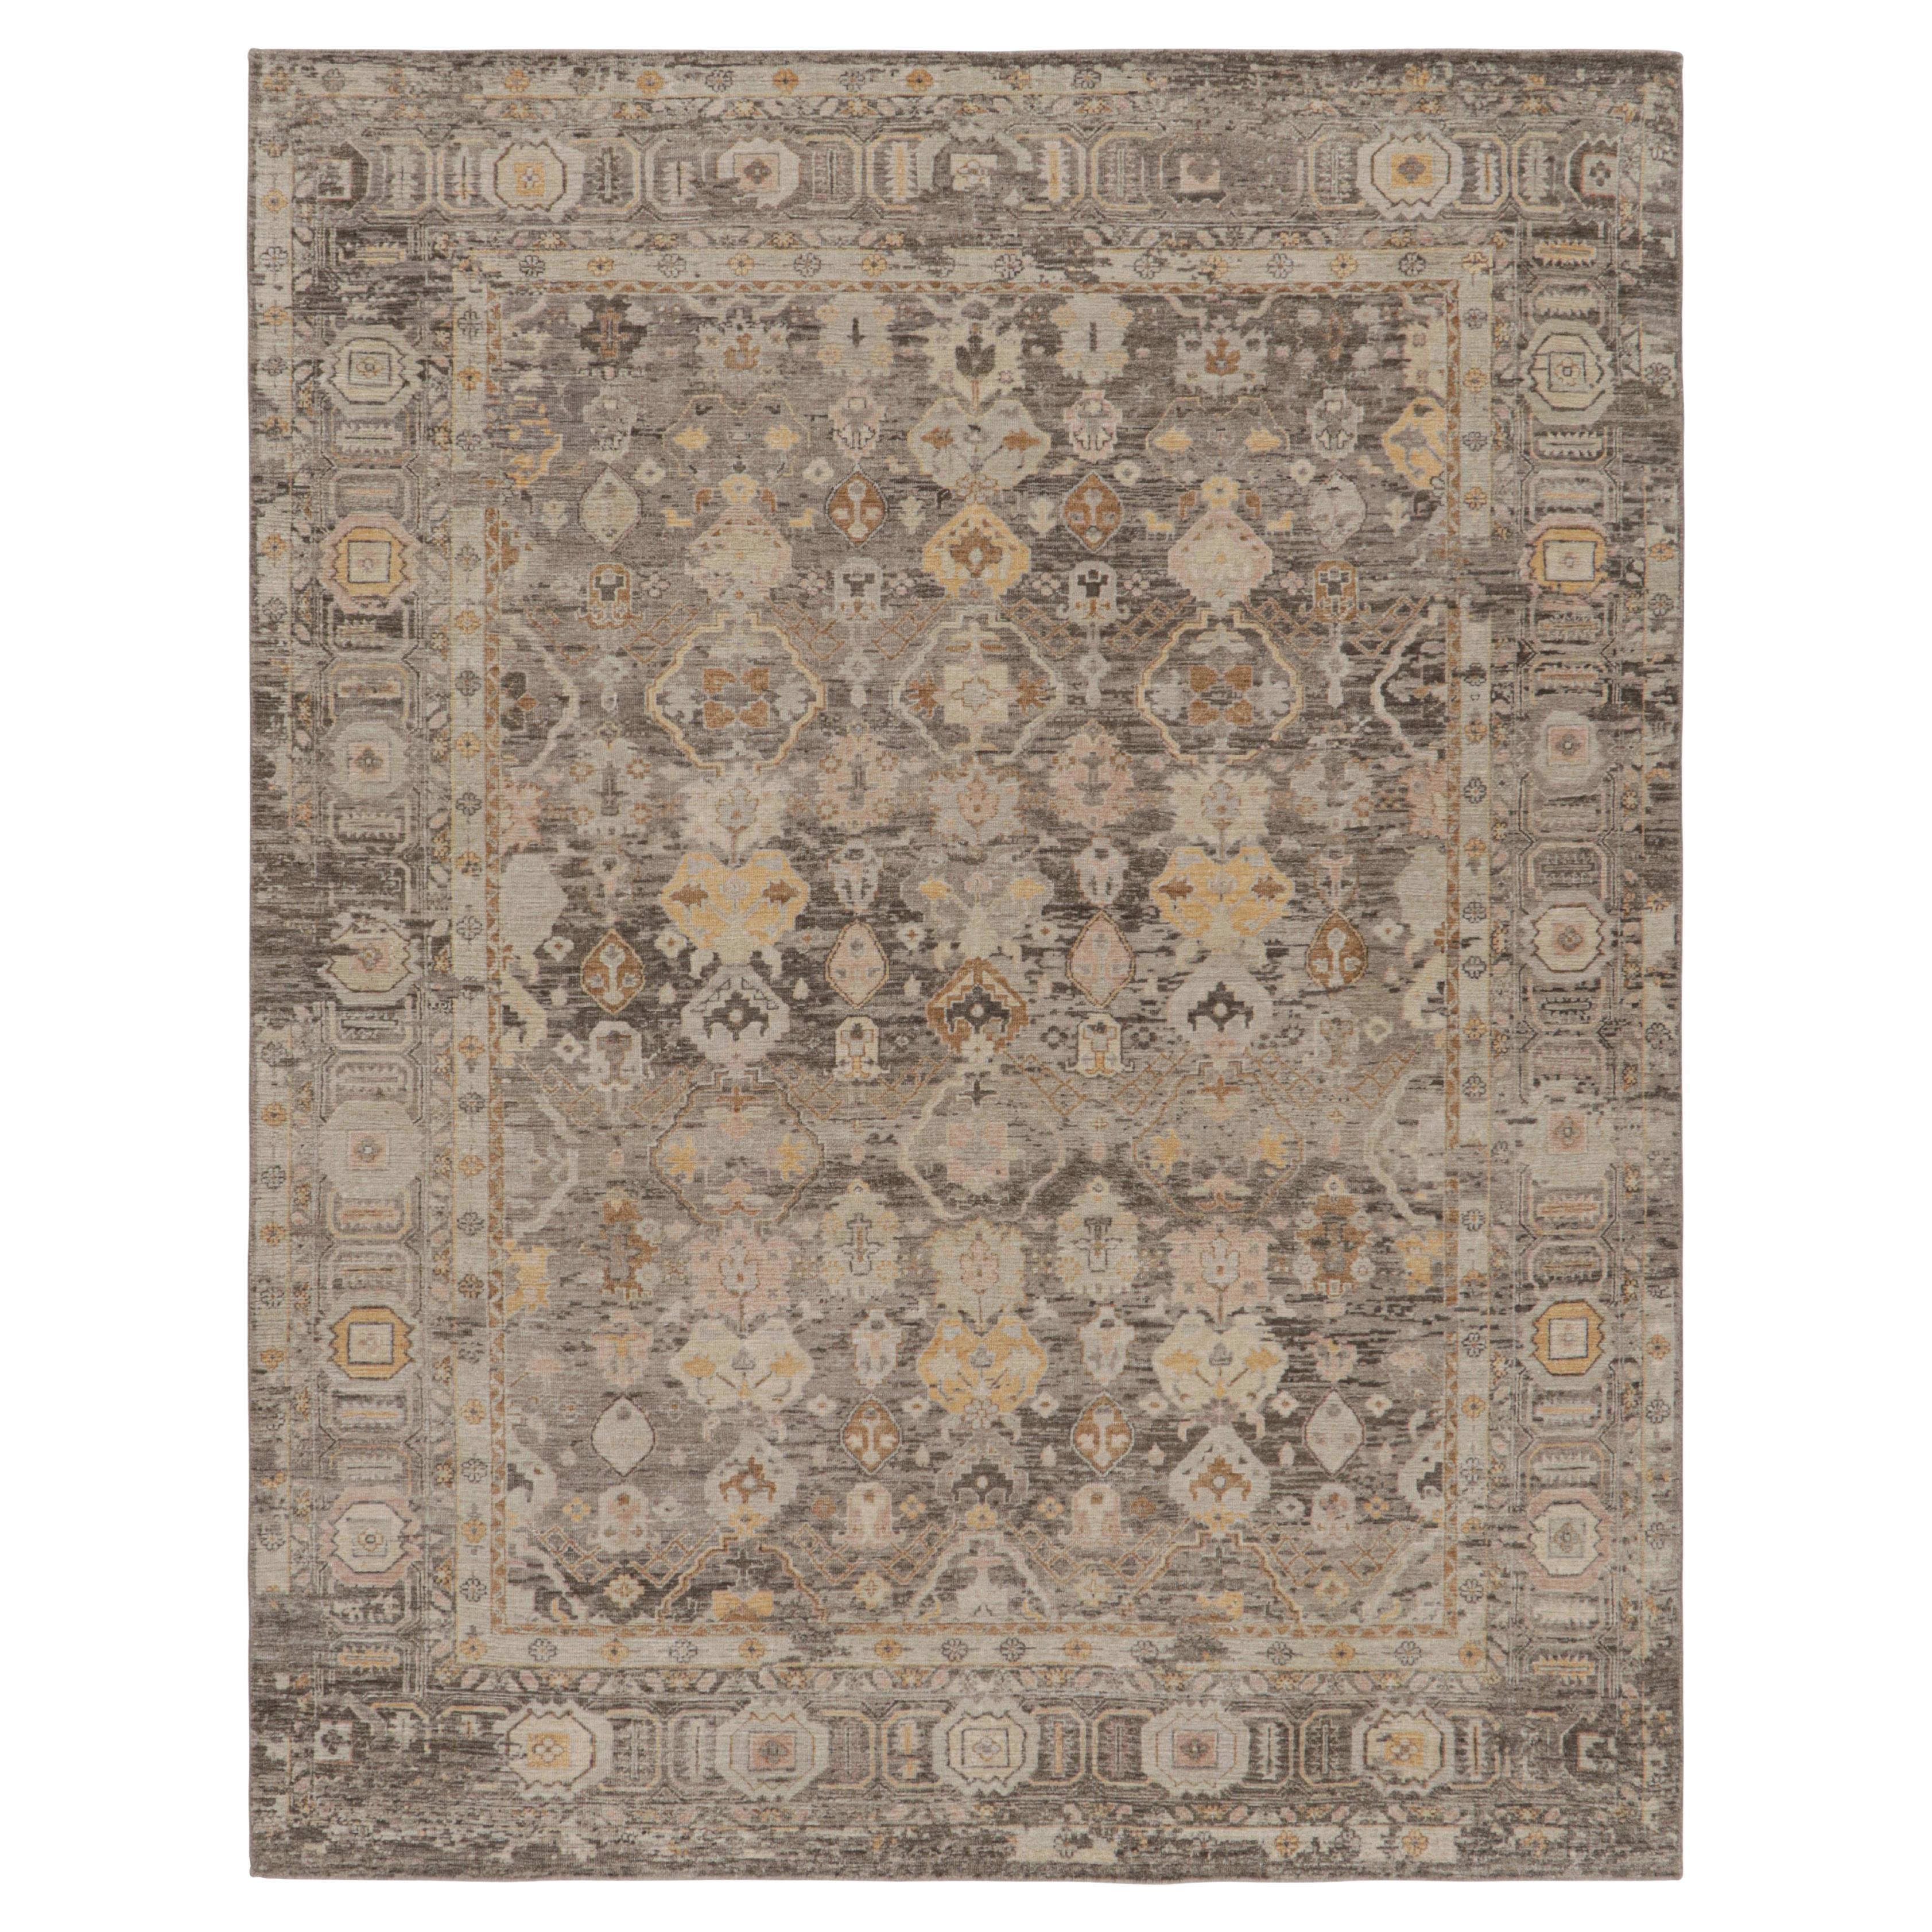 Rug & Kilim’s Oushak Style Rug in Silver-Gray with Geometric-Floral Patterns For Sale